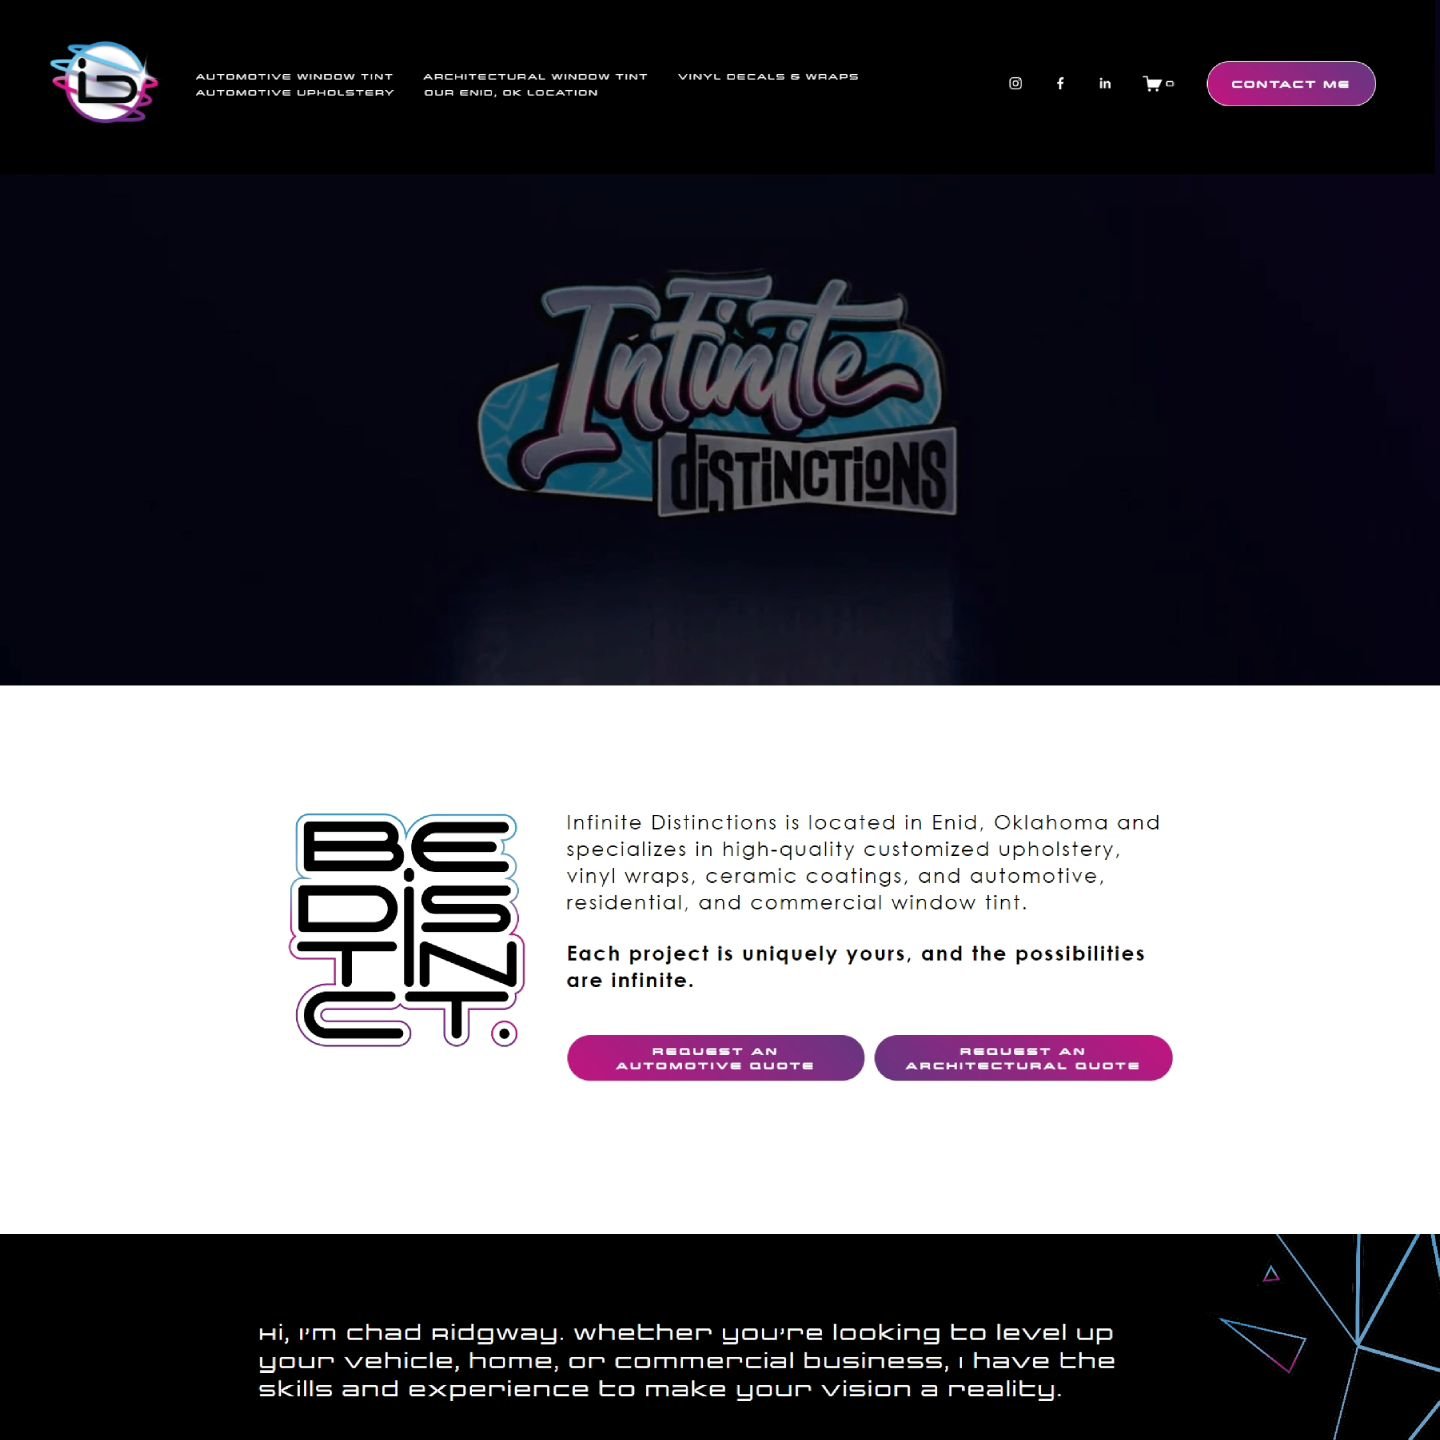 From custom upholstery to vinyl wraps and window tint, @infinitedistinctions turns cars into works of art. And the founder of Infinite Distinctions, Chad, deserved a website that showcased his talents.

We took the branding that had been created fo